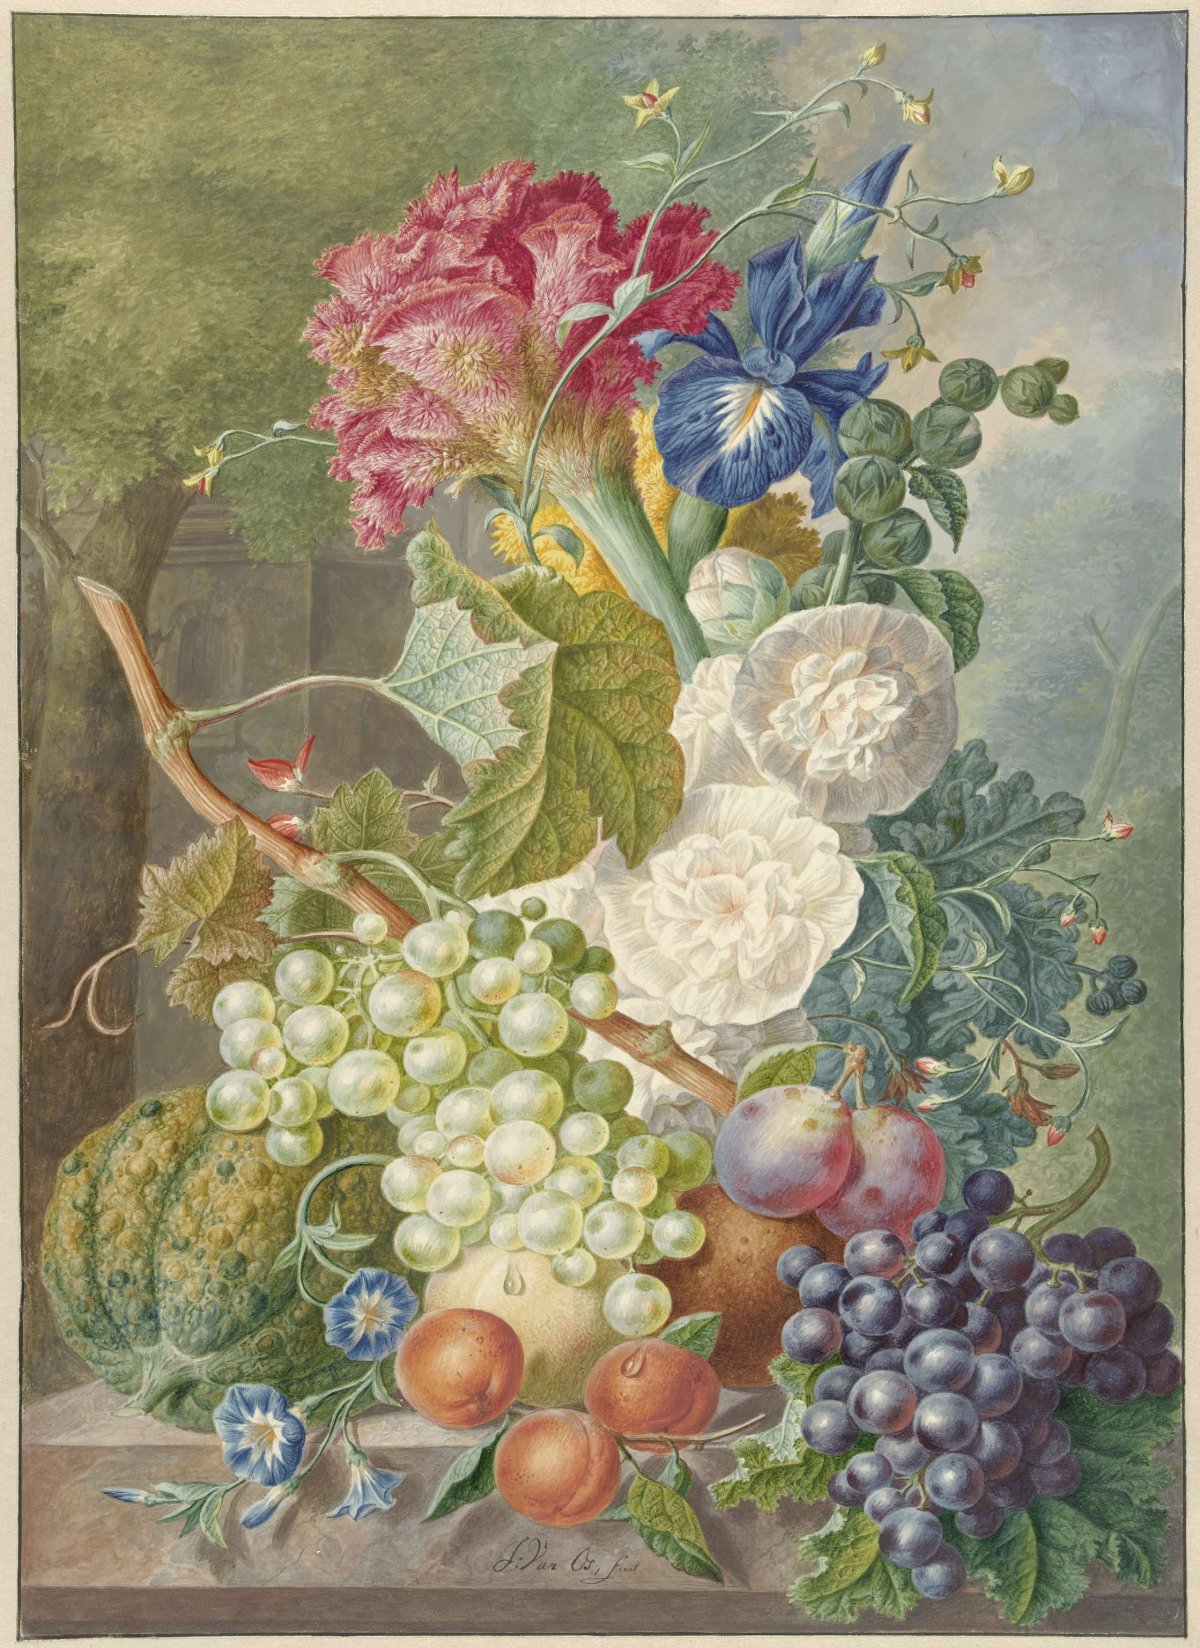 Still Life with Flowers and Fruit, Jan van Os, c. 1775 - c. 1800